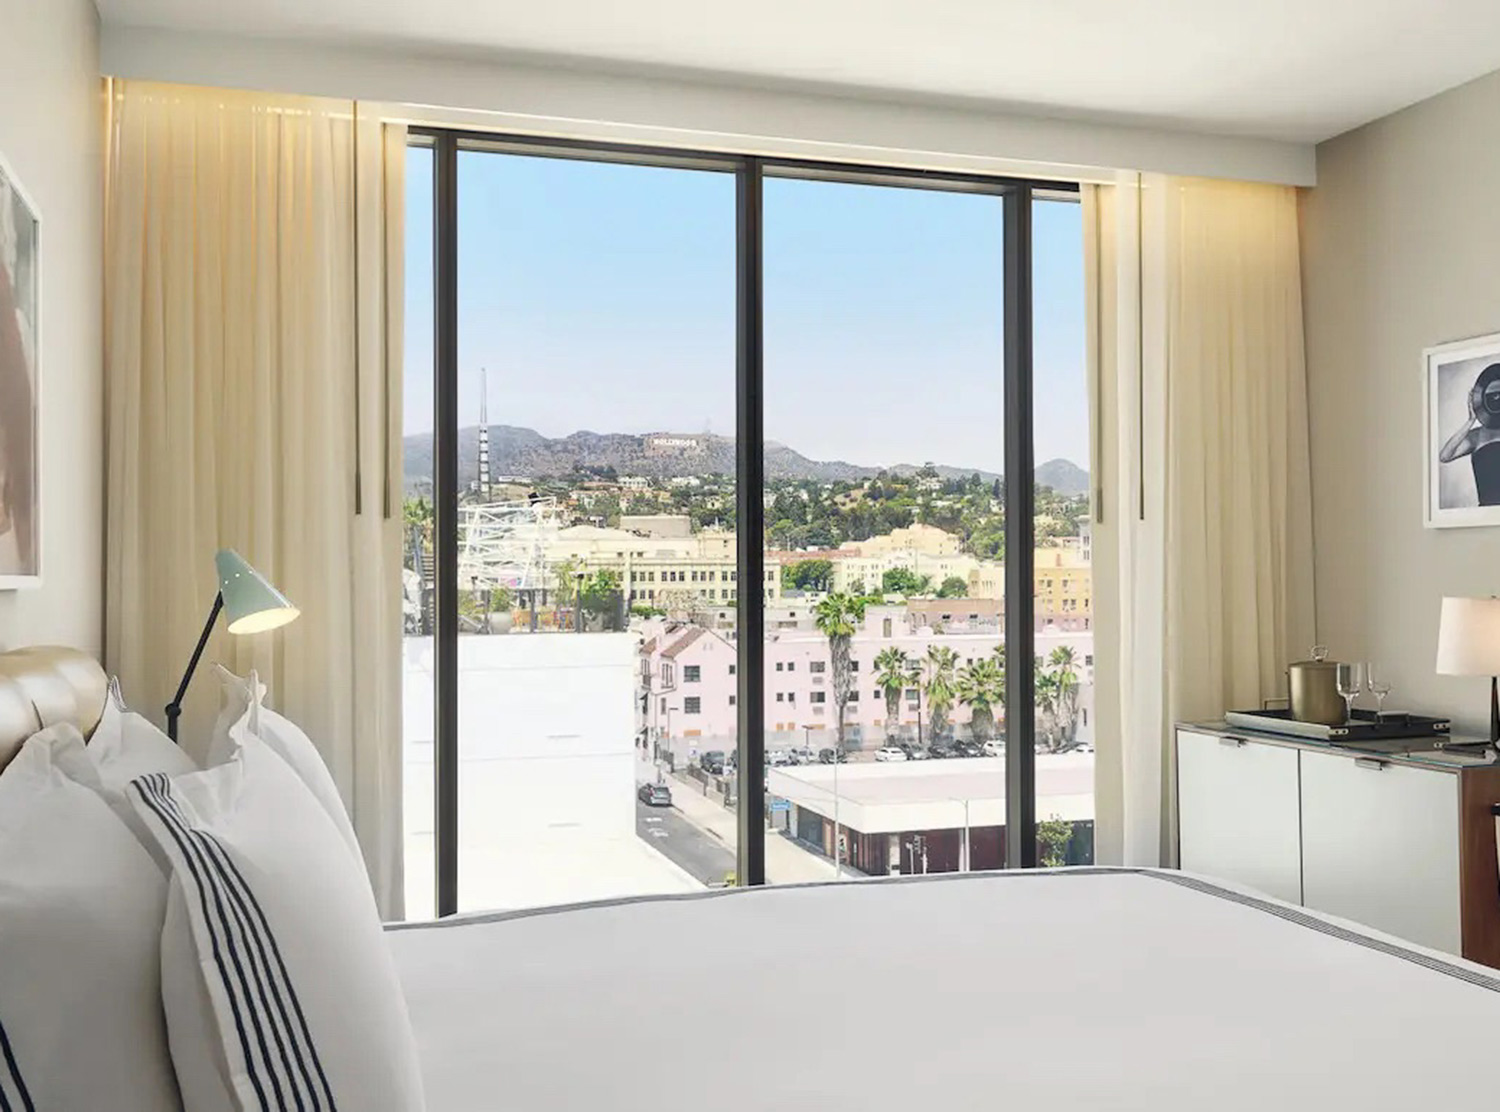 Rooms at the Thompson Hollywood come with unbeatable views